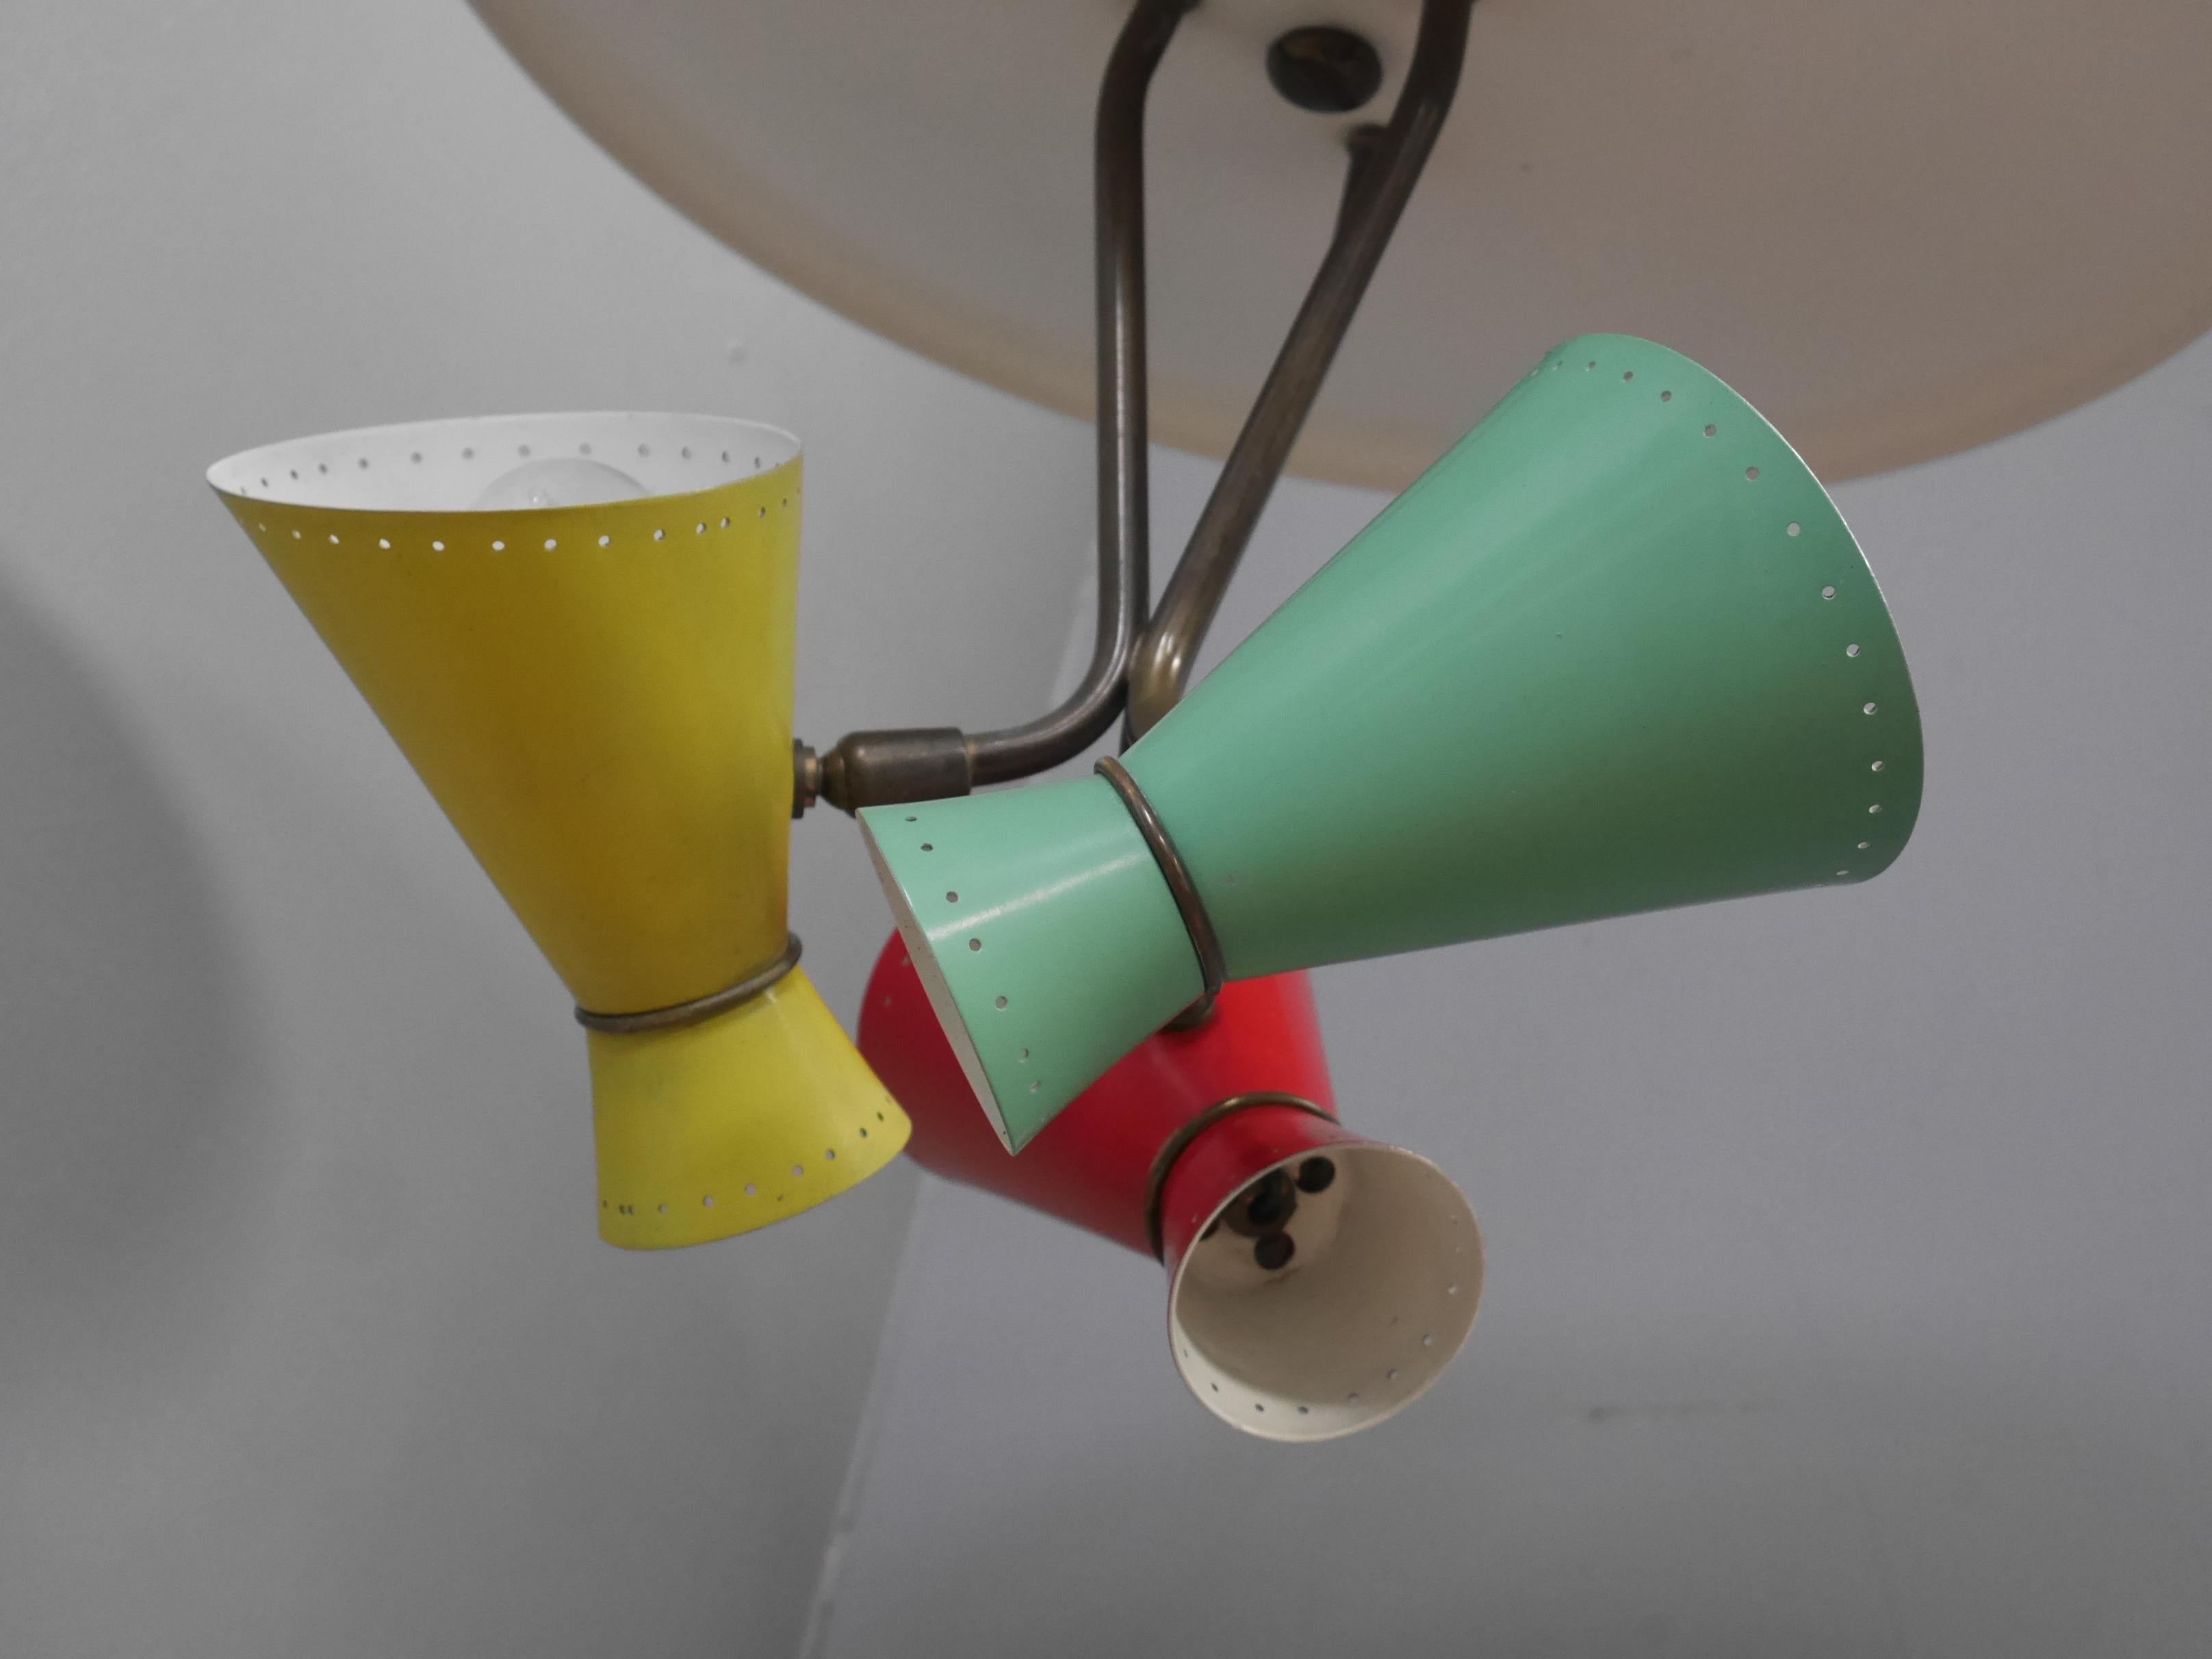 A vintage Italian pendant light c1950.
A phenomenal mid century Italian pendant light, the large white reflector supporting three patinated brass arms terminating in articulated ball joints supporting multicoloured 'diablo' shades. The red, yellow &